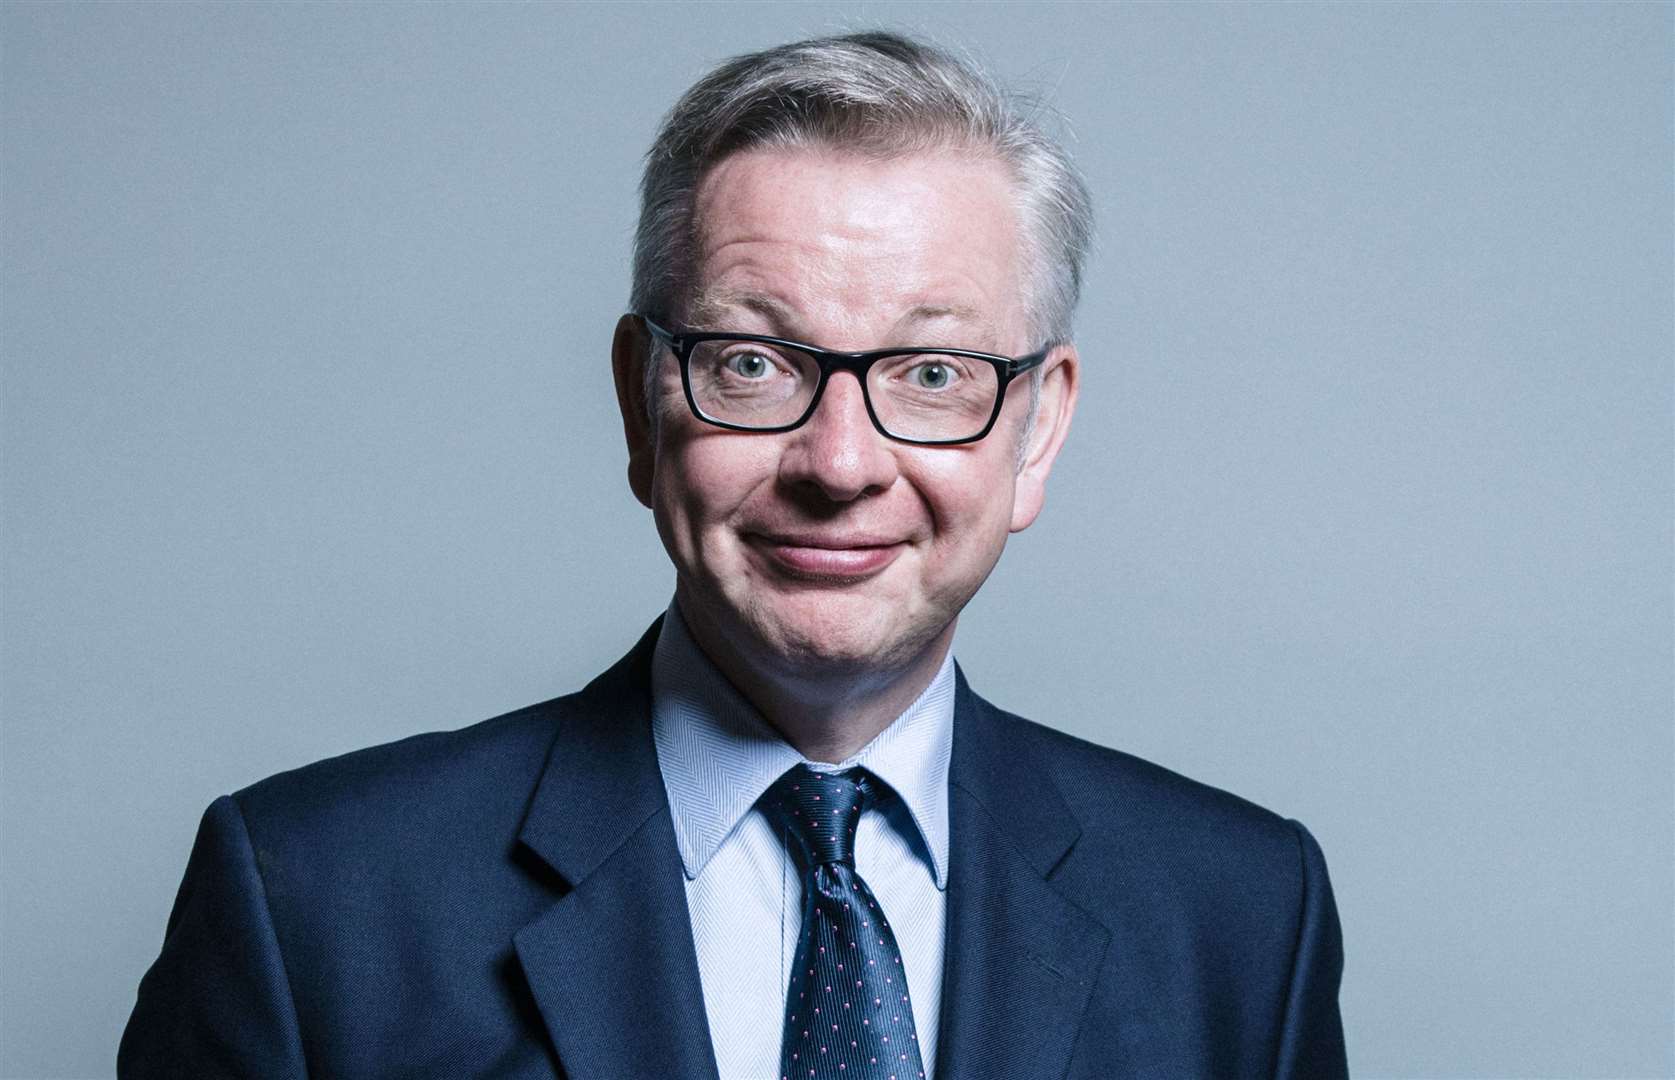 Levelling Up minister Michael Gove recently said the government would stick by its target for 300,000 new homes a year